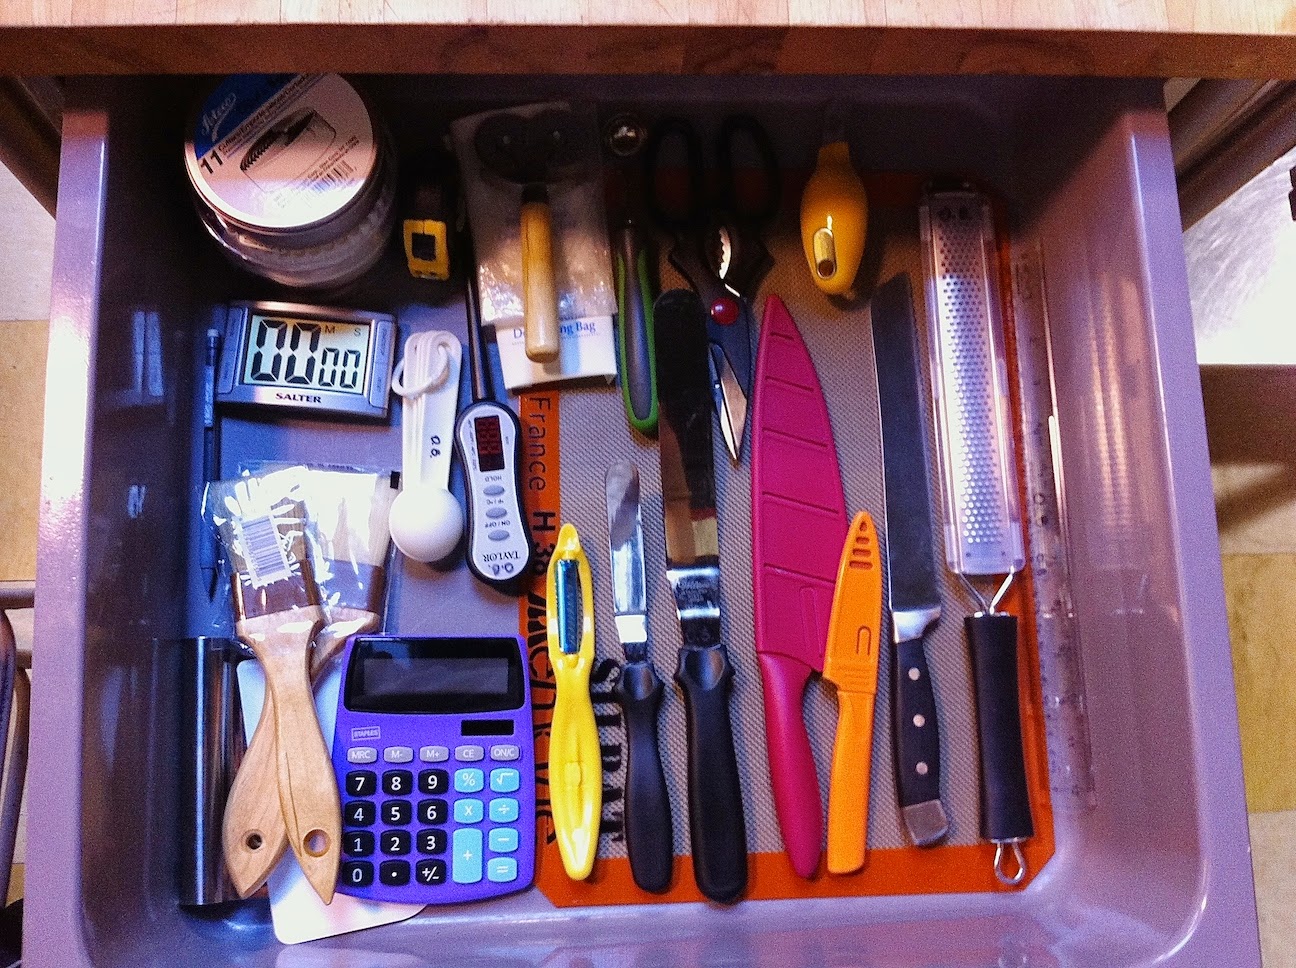 Pastry tools in a drawer.